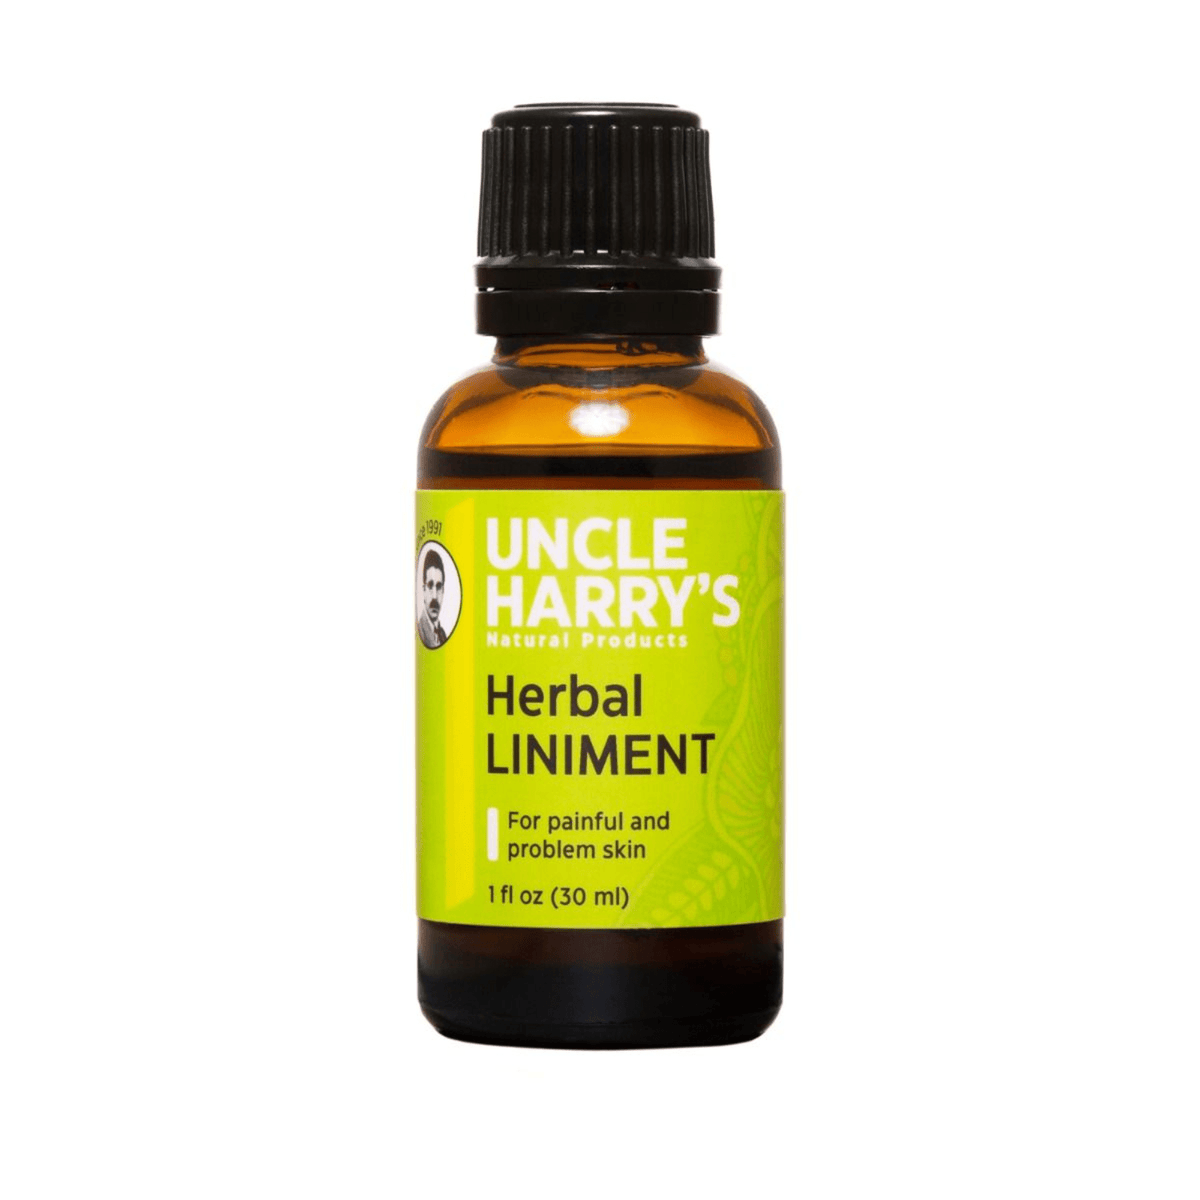 Primary Image of Herbal Linament